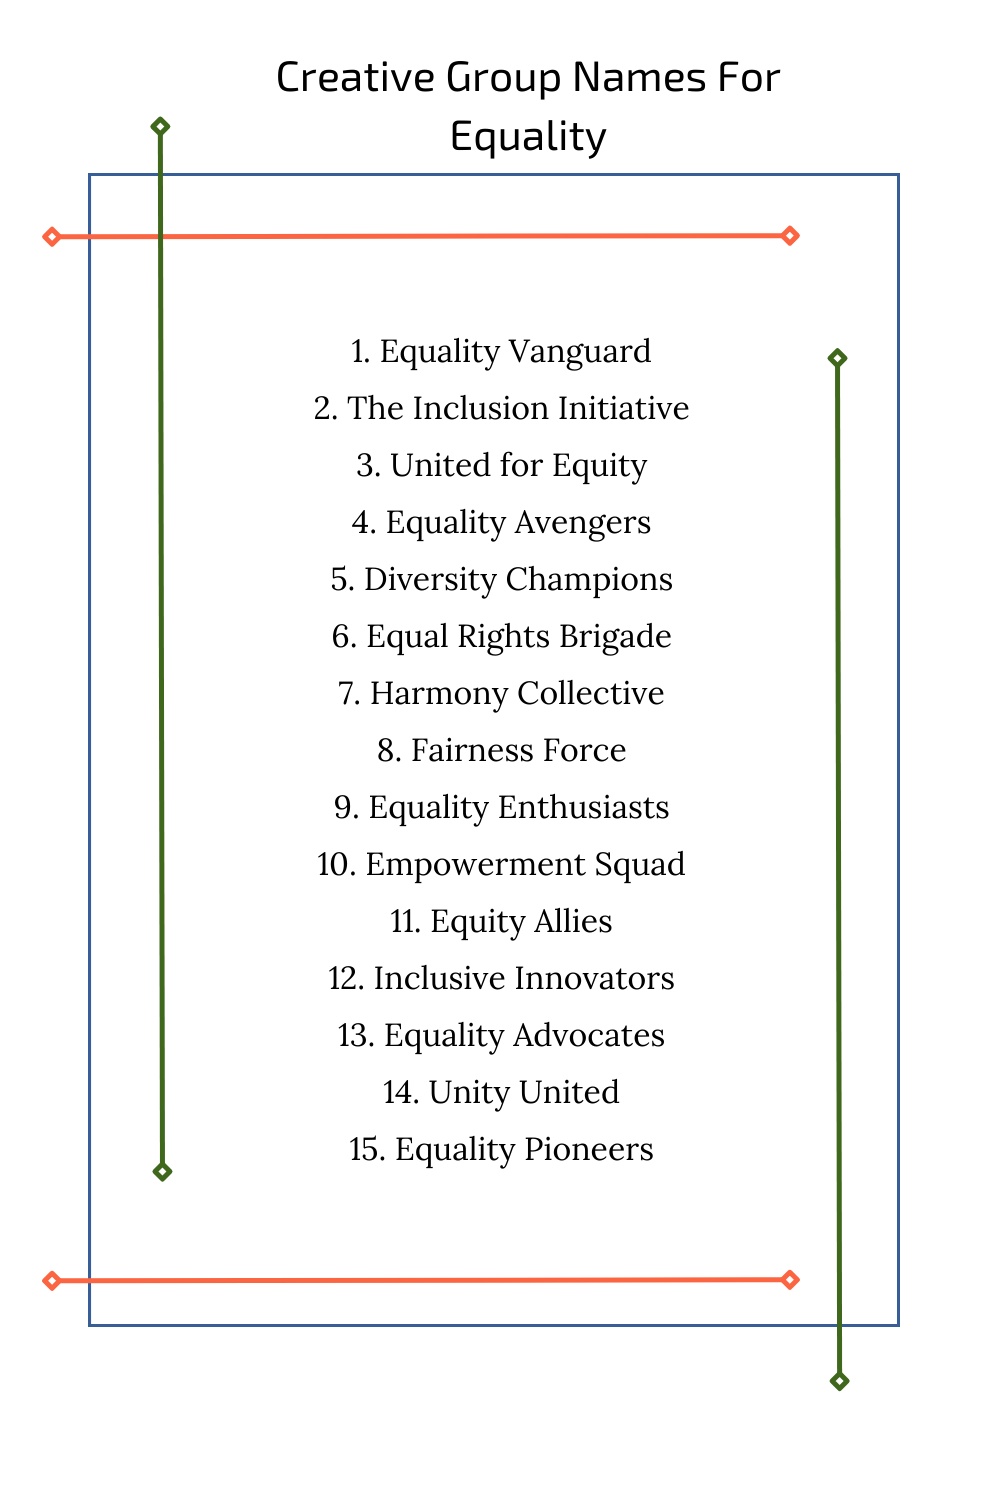 Creative Group Names For Equality